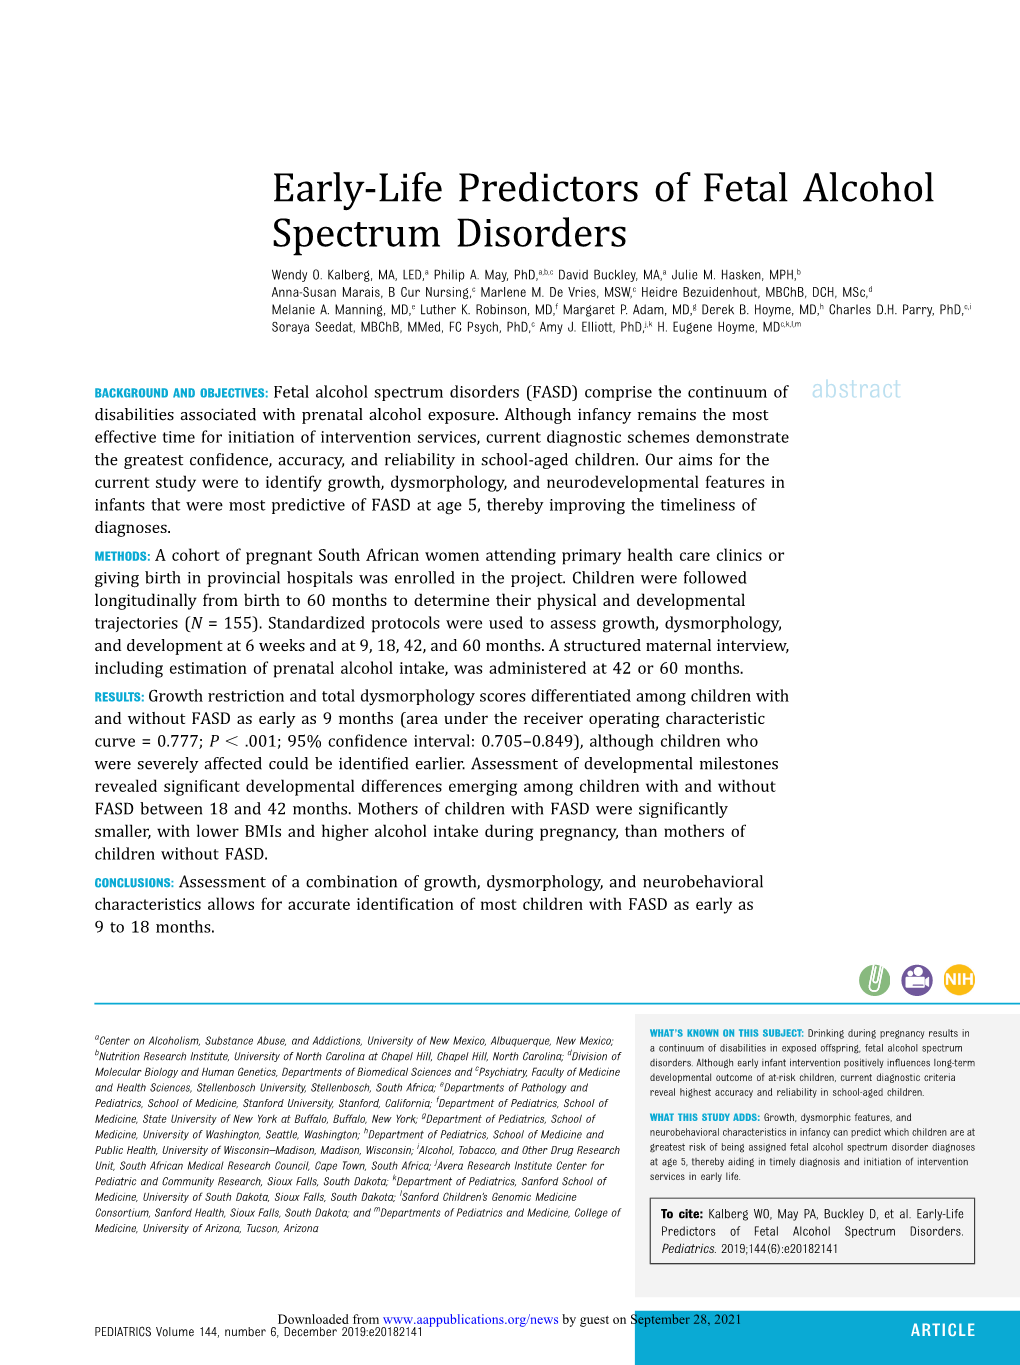 Early-Life Predictors of Fetal Alcohol Spectrum Disorders Wendy O